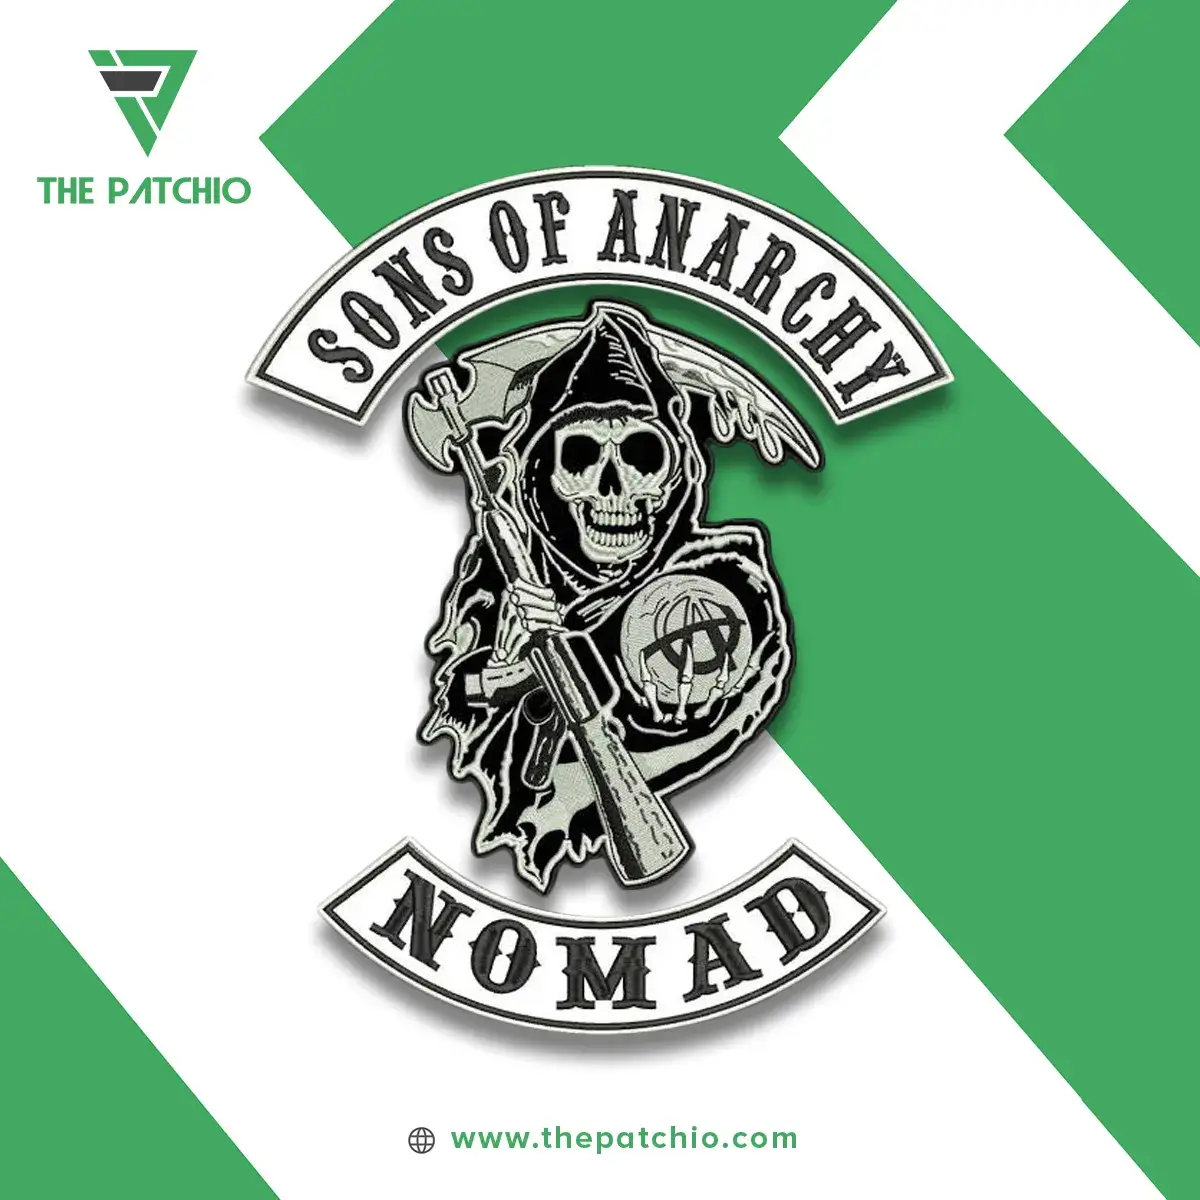 https://www.thepatchio.com/assets/img/custom-biker-patches/son-of-anarchy-biker-patch.webp